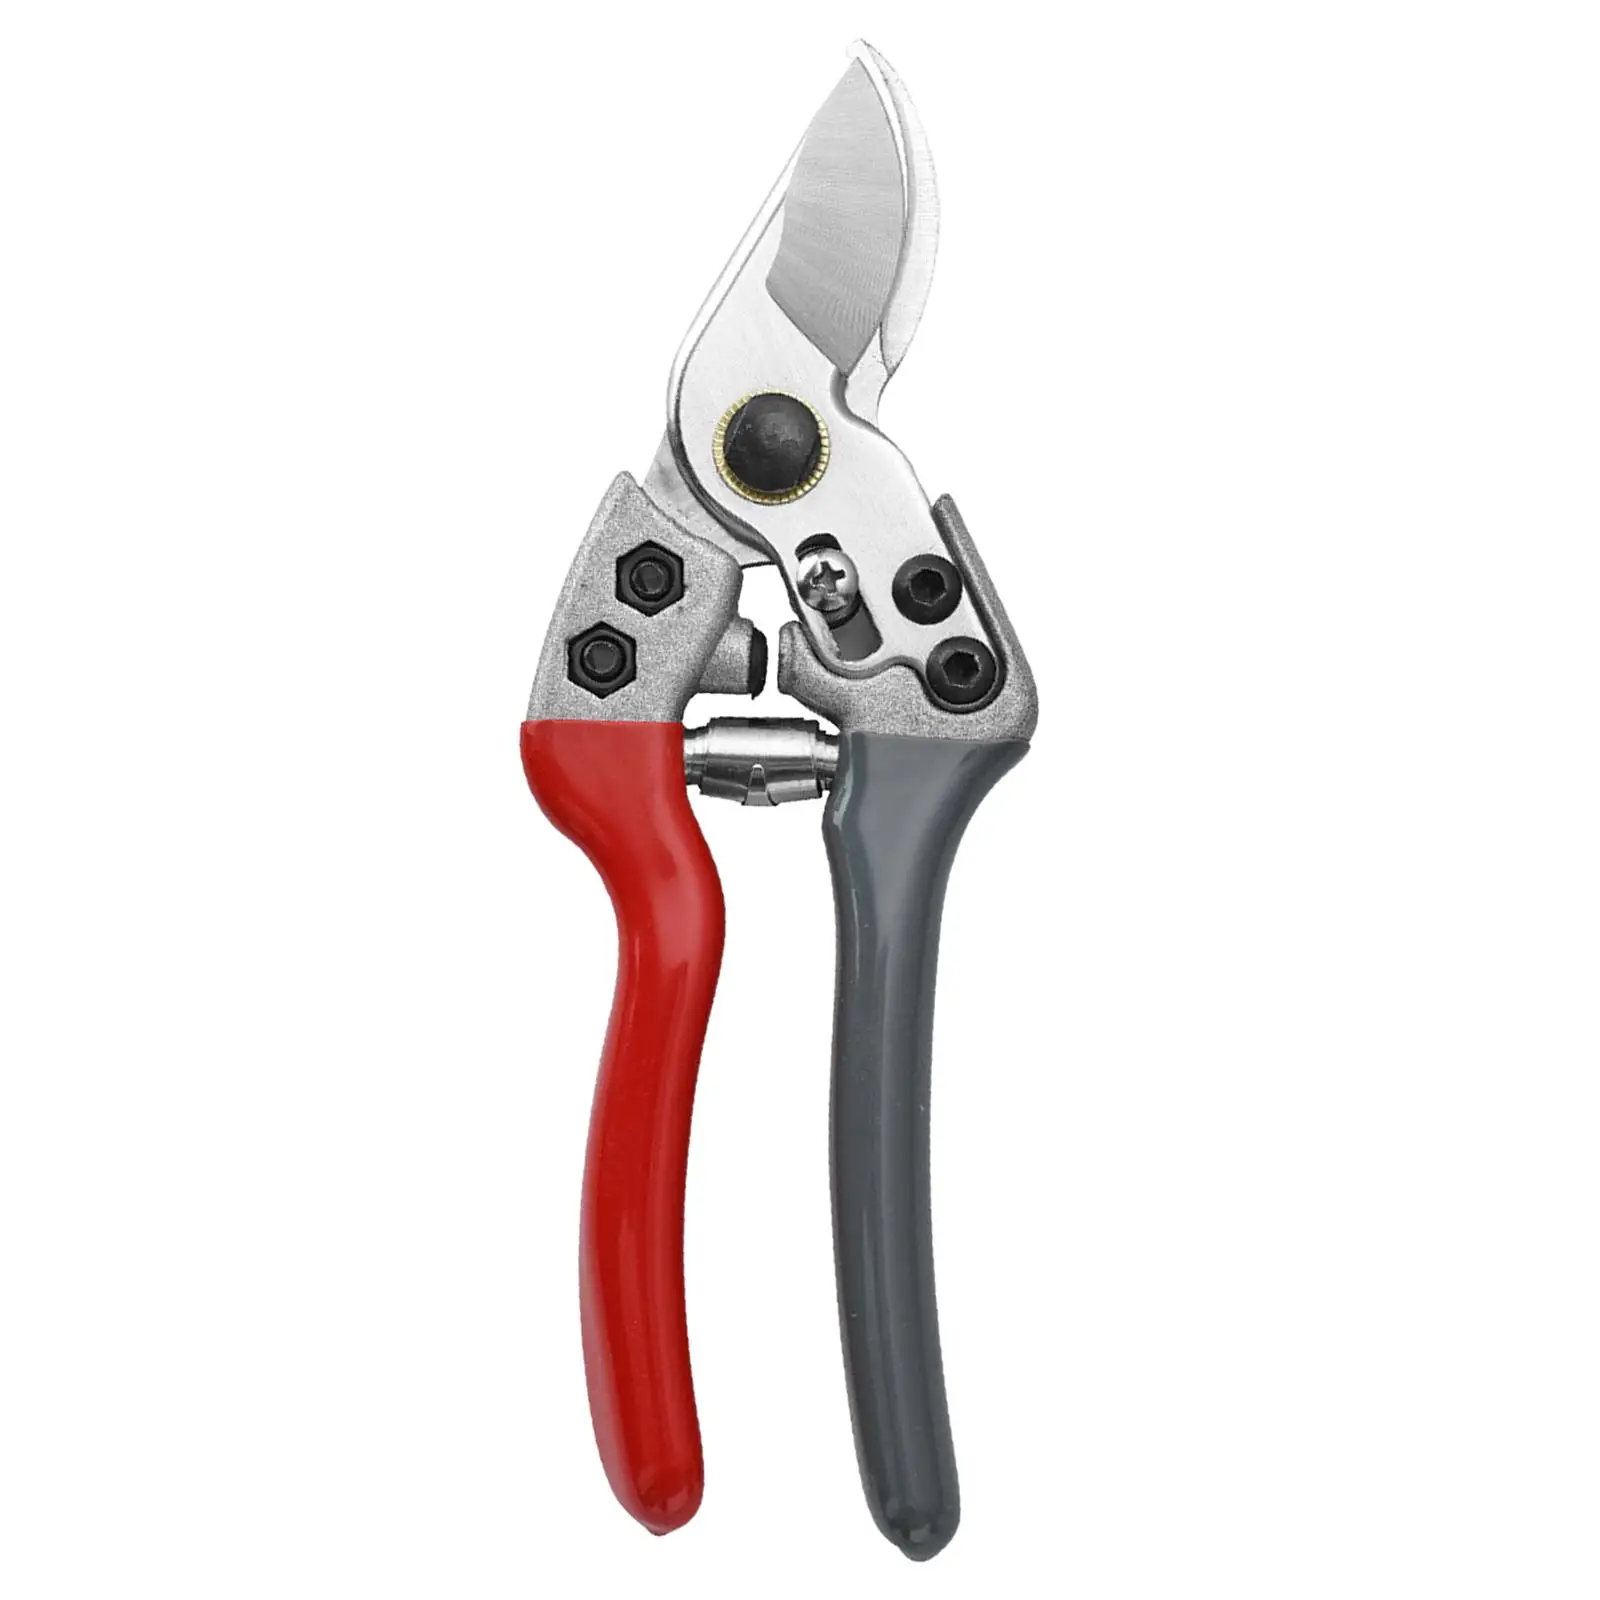 Pruning shear Rose Flower Hedge Cutter with Lock Hand Pruners for Branches